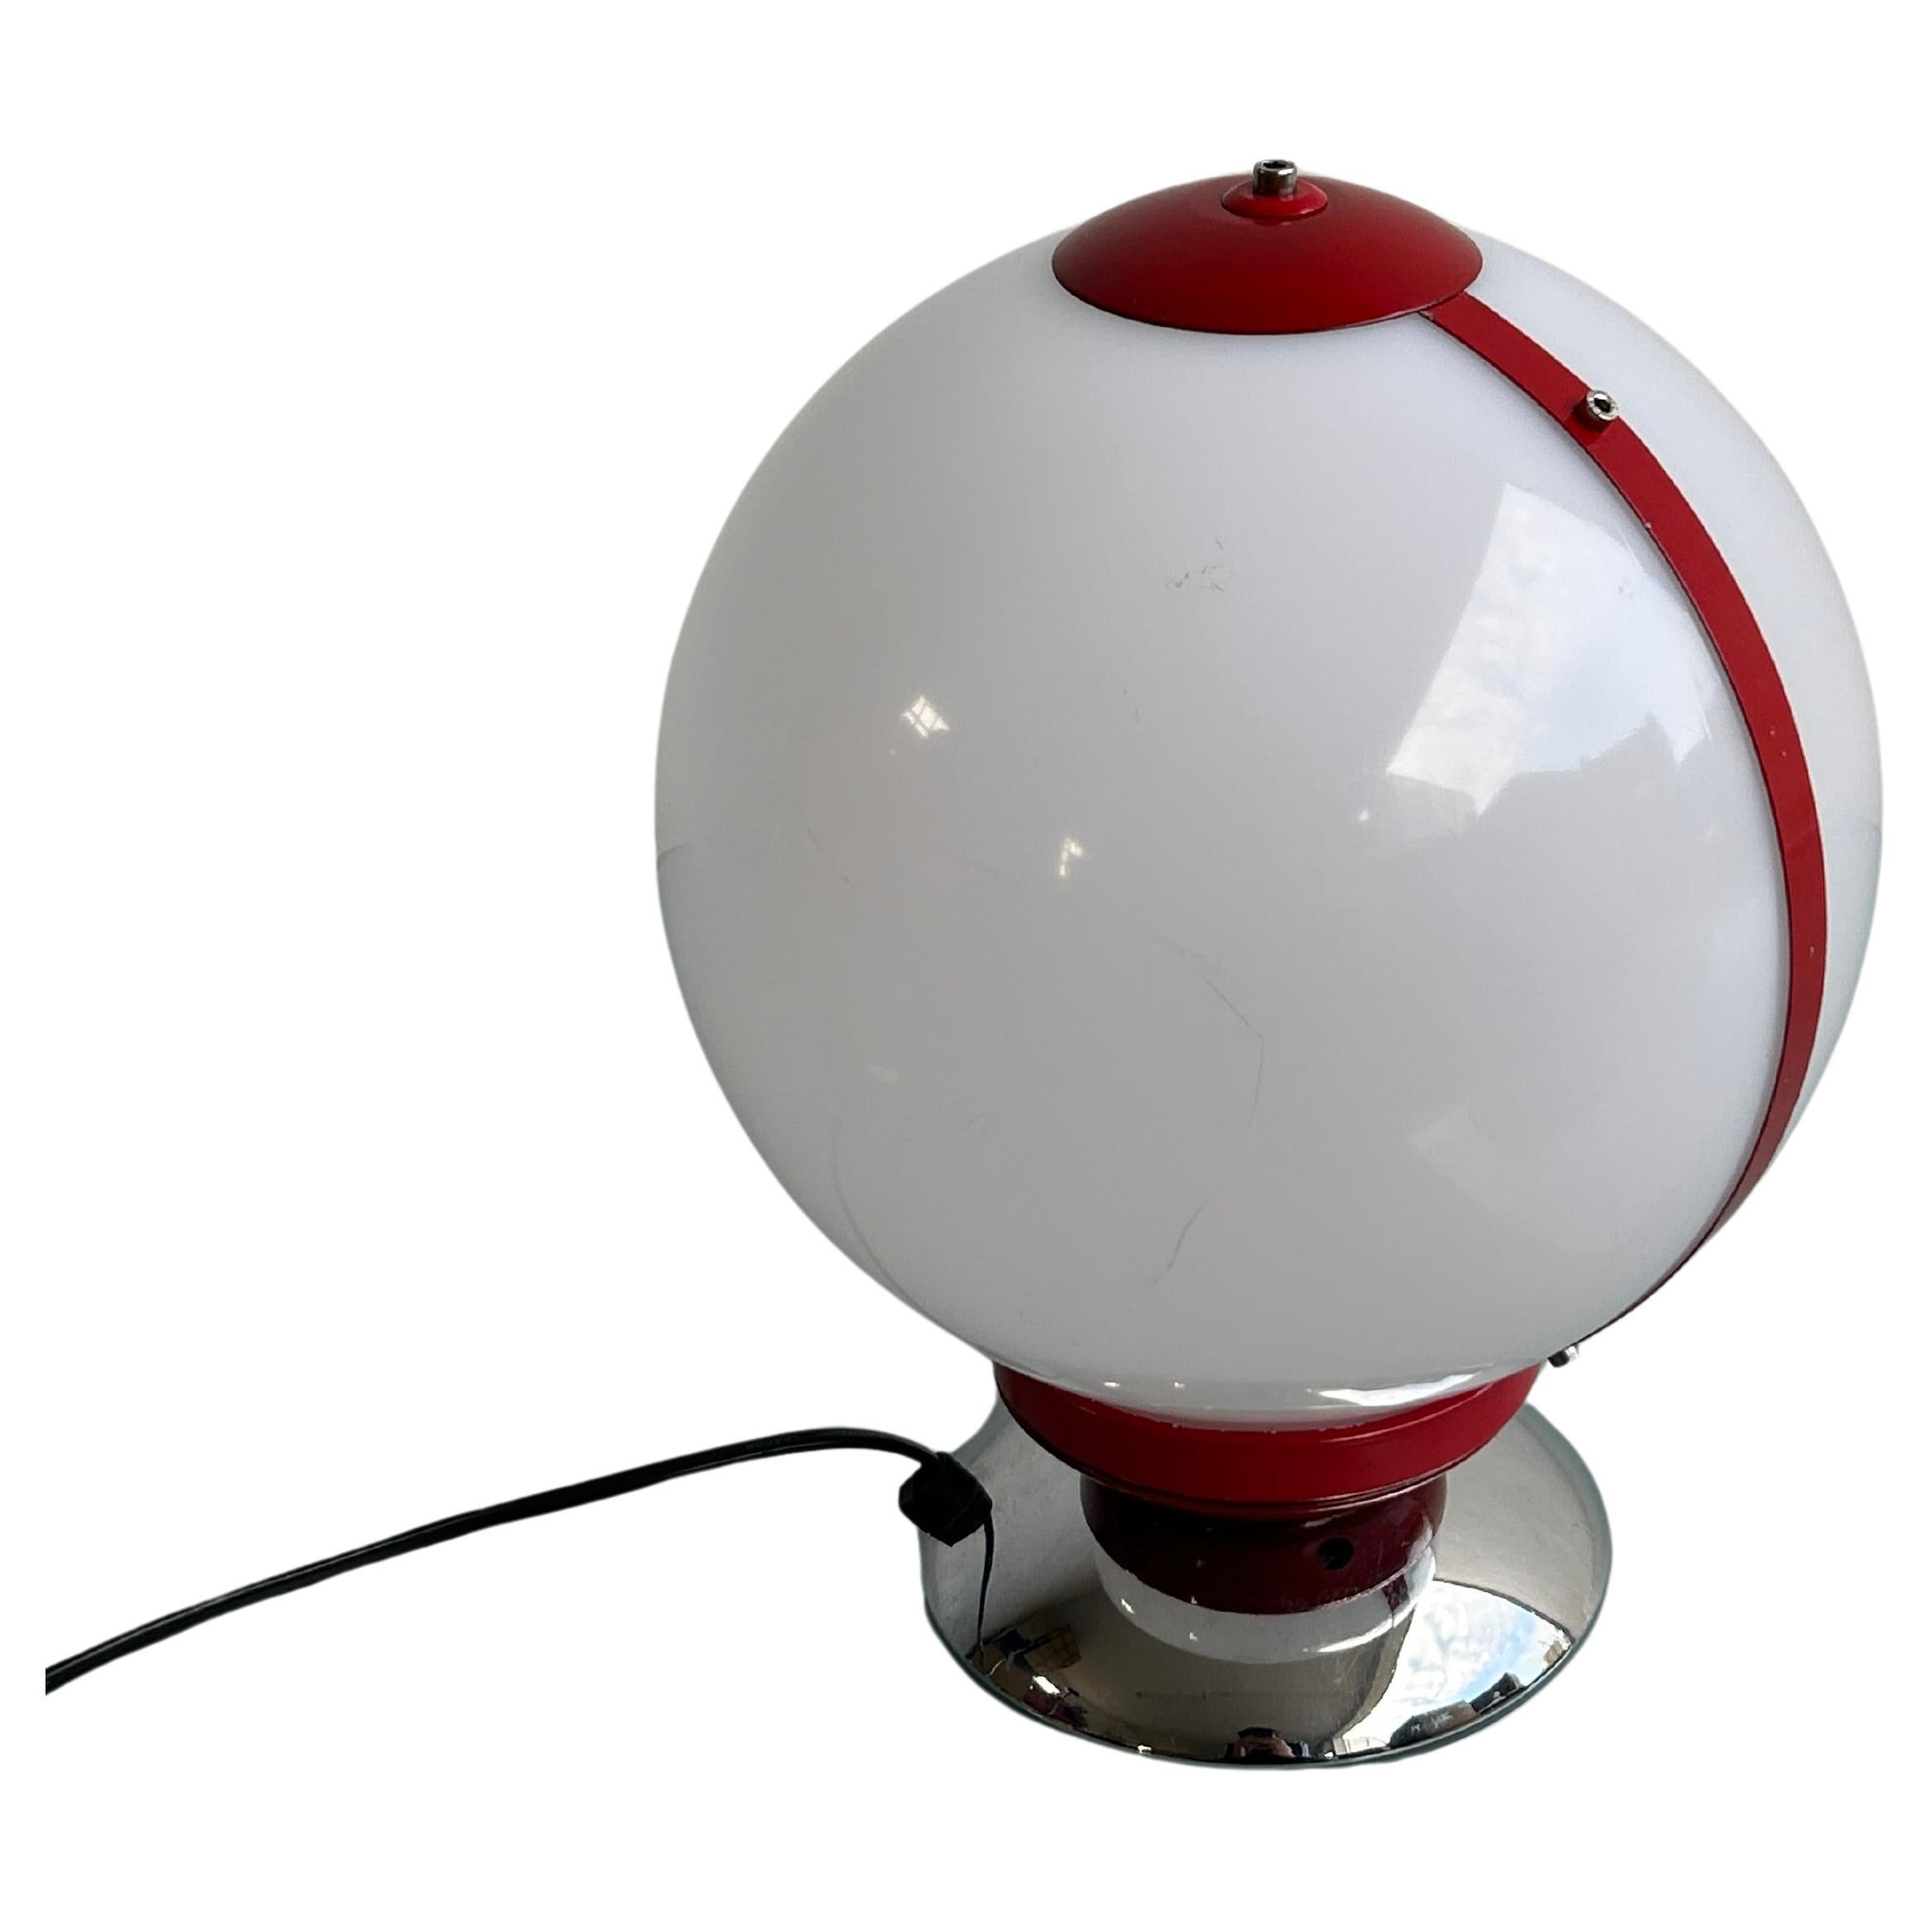 Vintage Plastic White Sphere and Chrome Table Lamp, 1970s Mid-Century Space Age